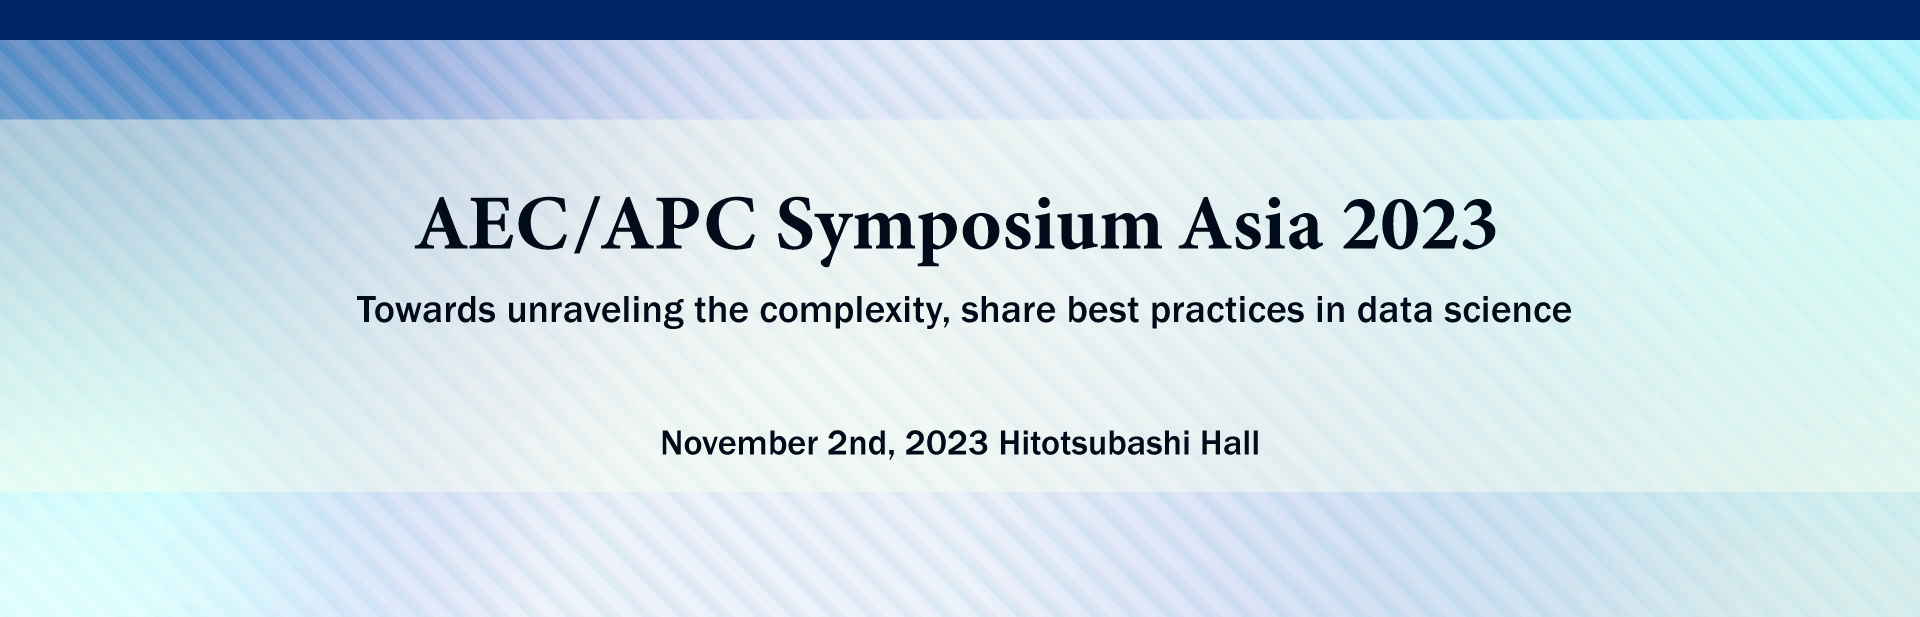 AEC/APC Symposium Asia 2023 -Towards unraveling the complexity, share best practices in data science-